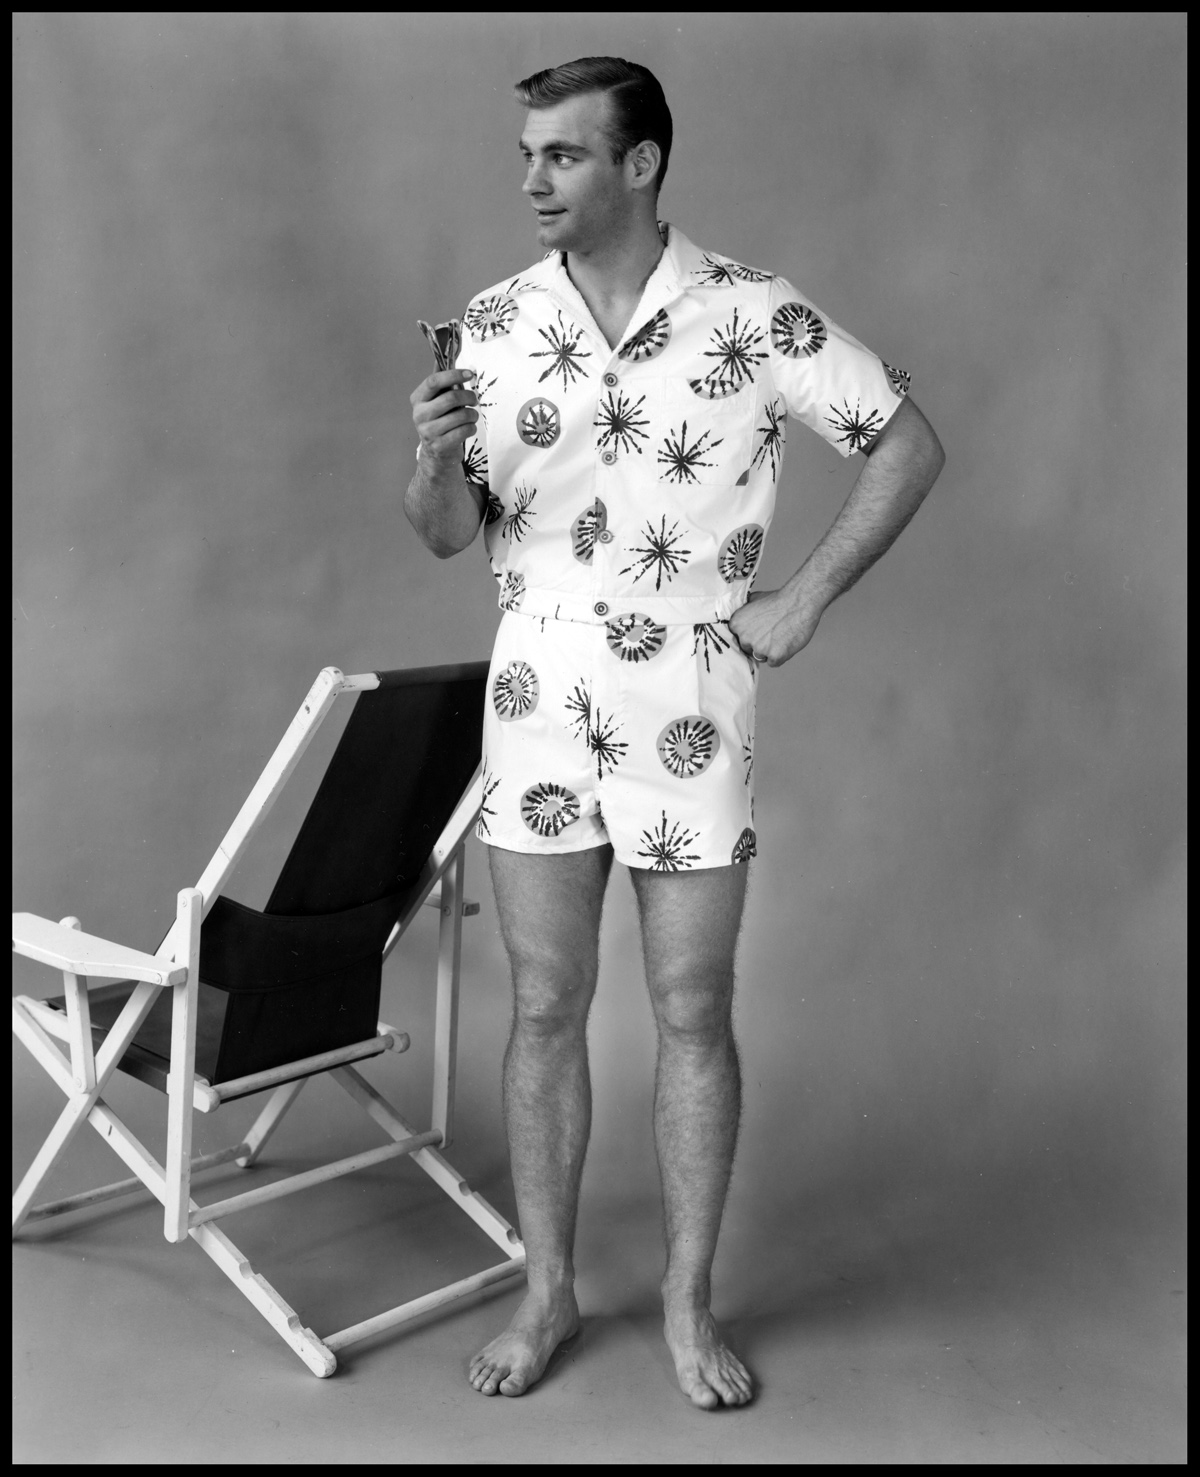 Black and white image of a man in a "cabana set" outfit next to a beach chair on a photography set.